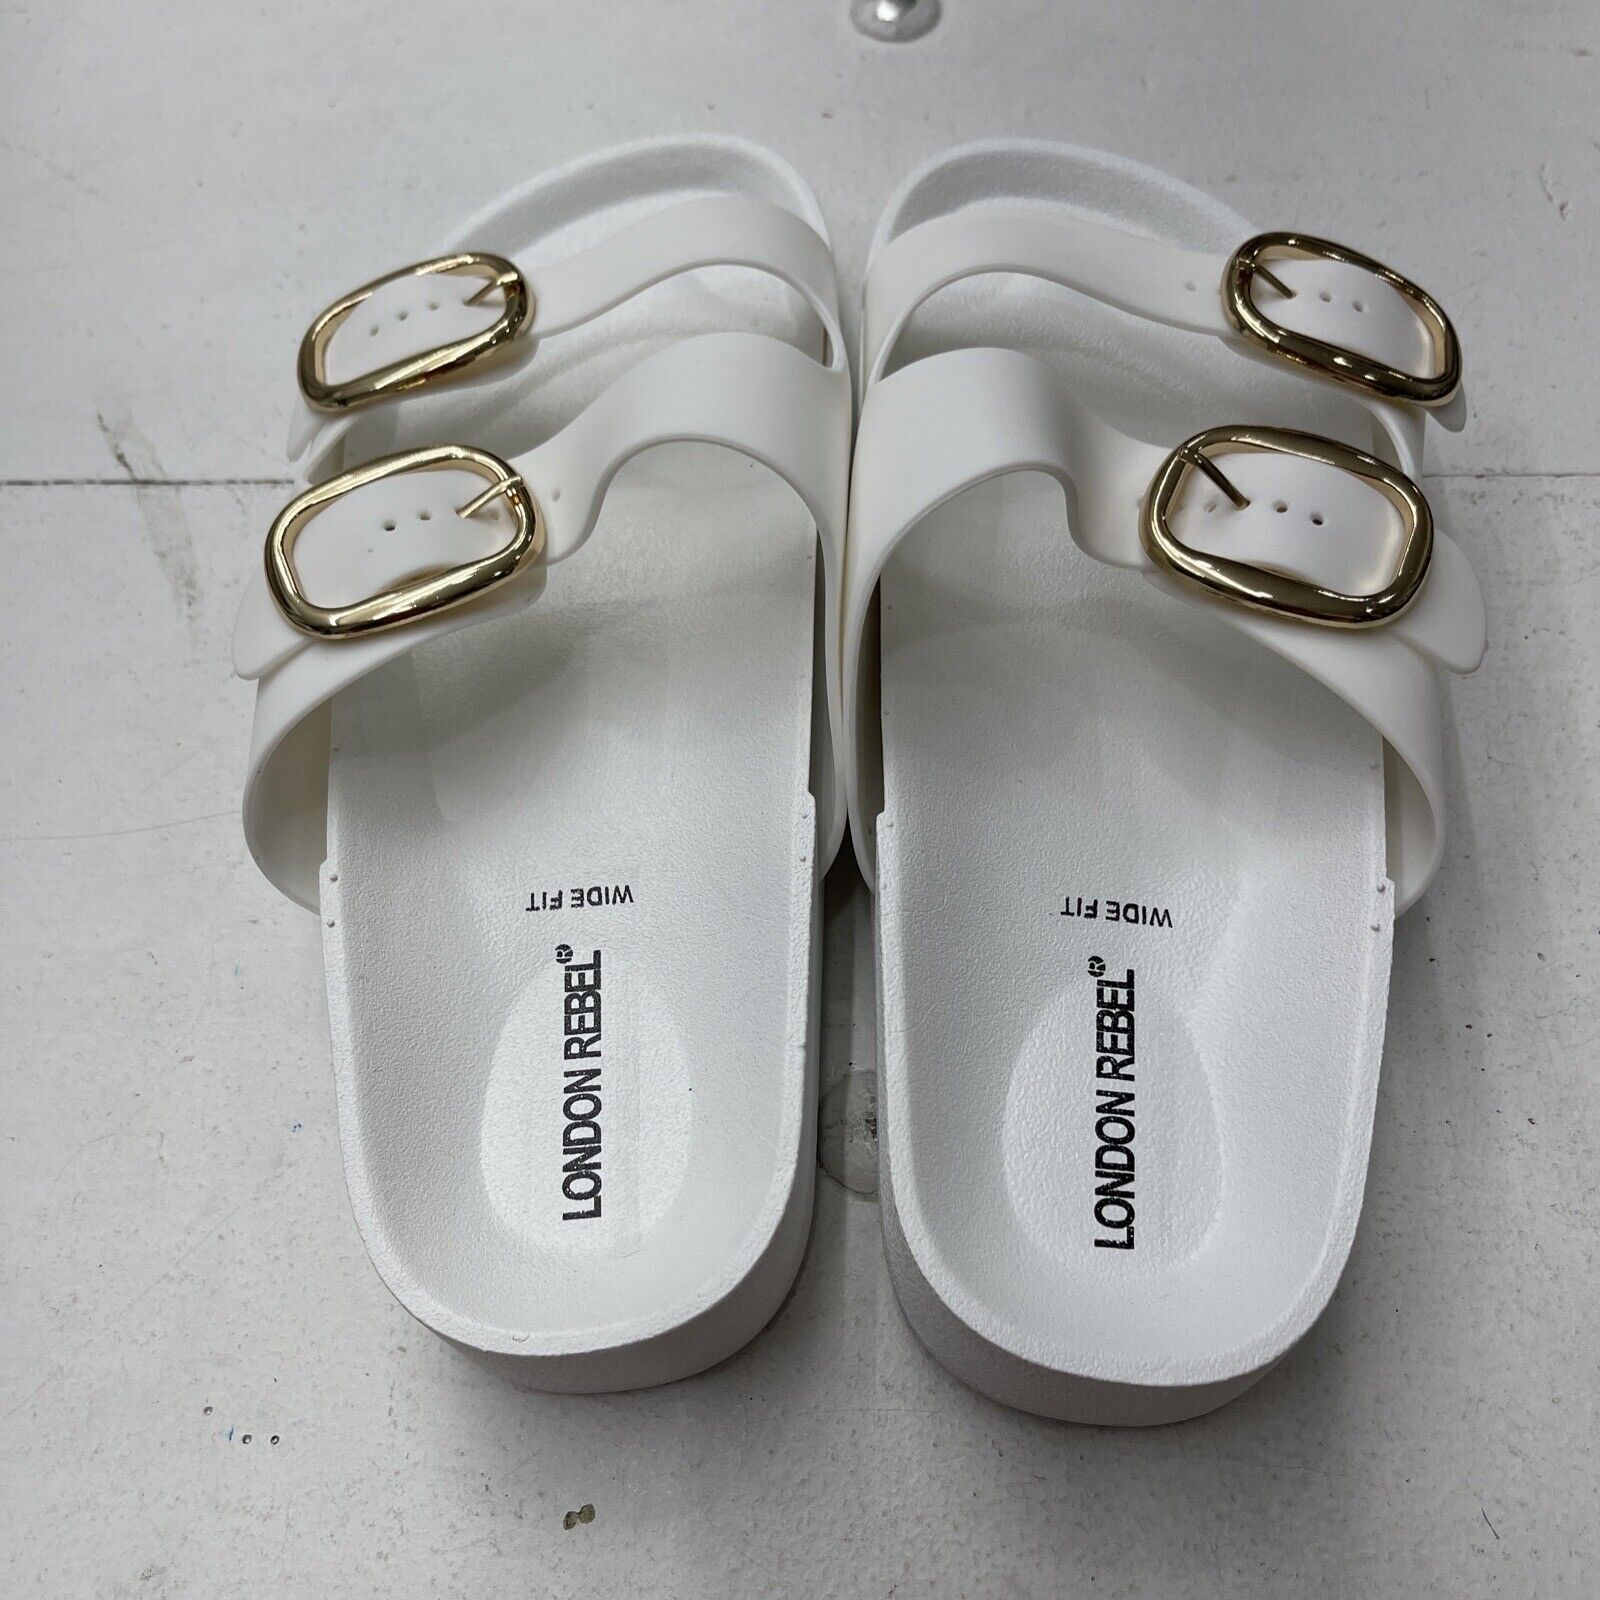 ASOS London Rebel White Double Buckle Footbed Sandals Women's Size